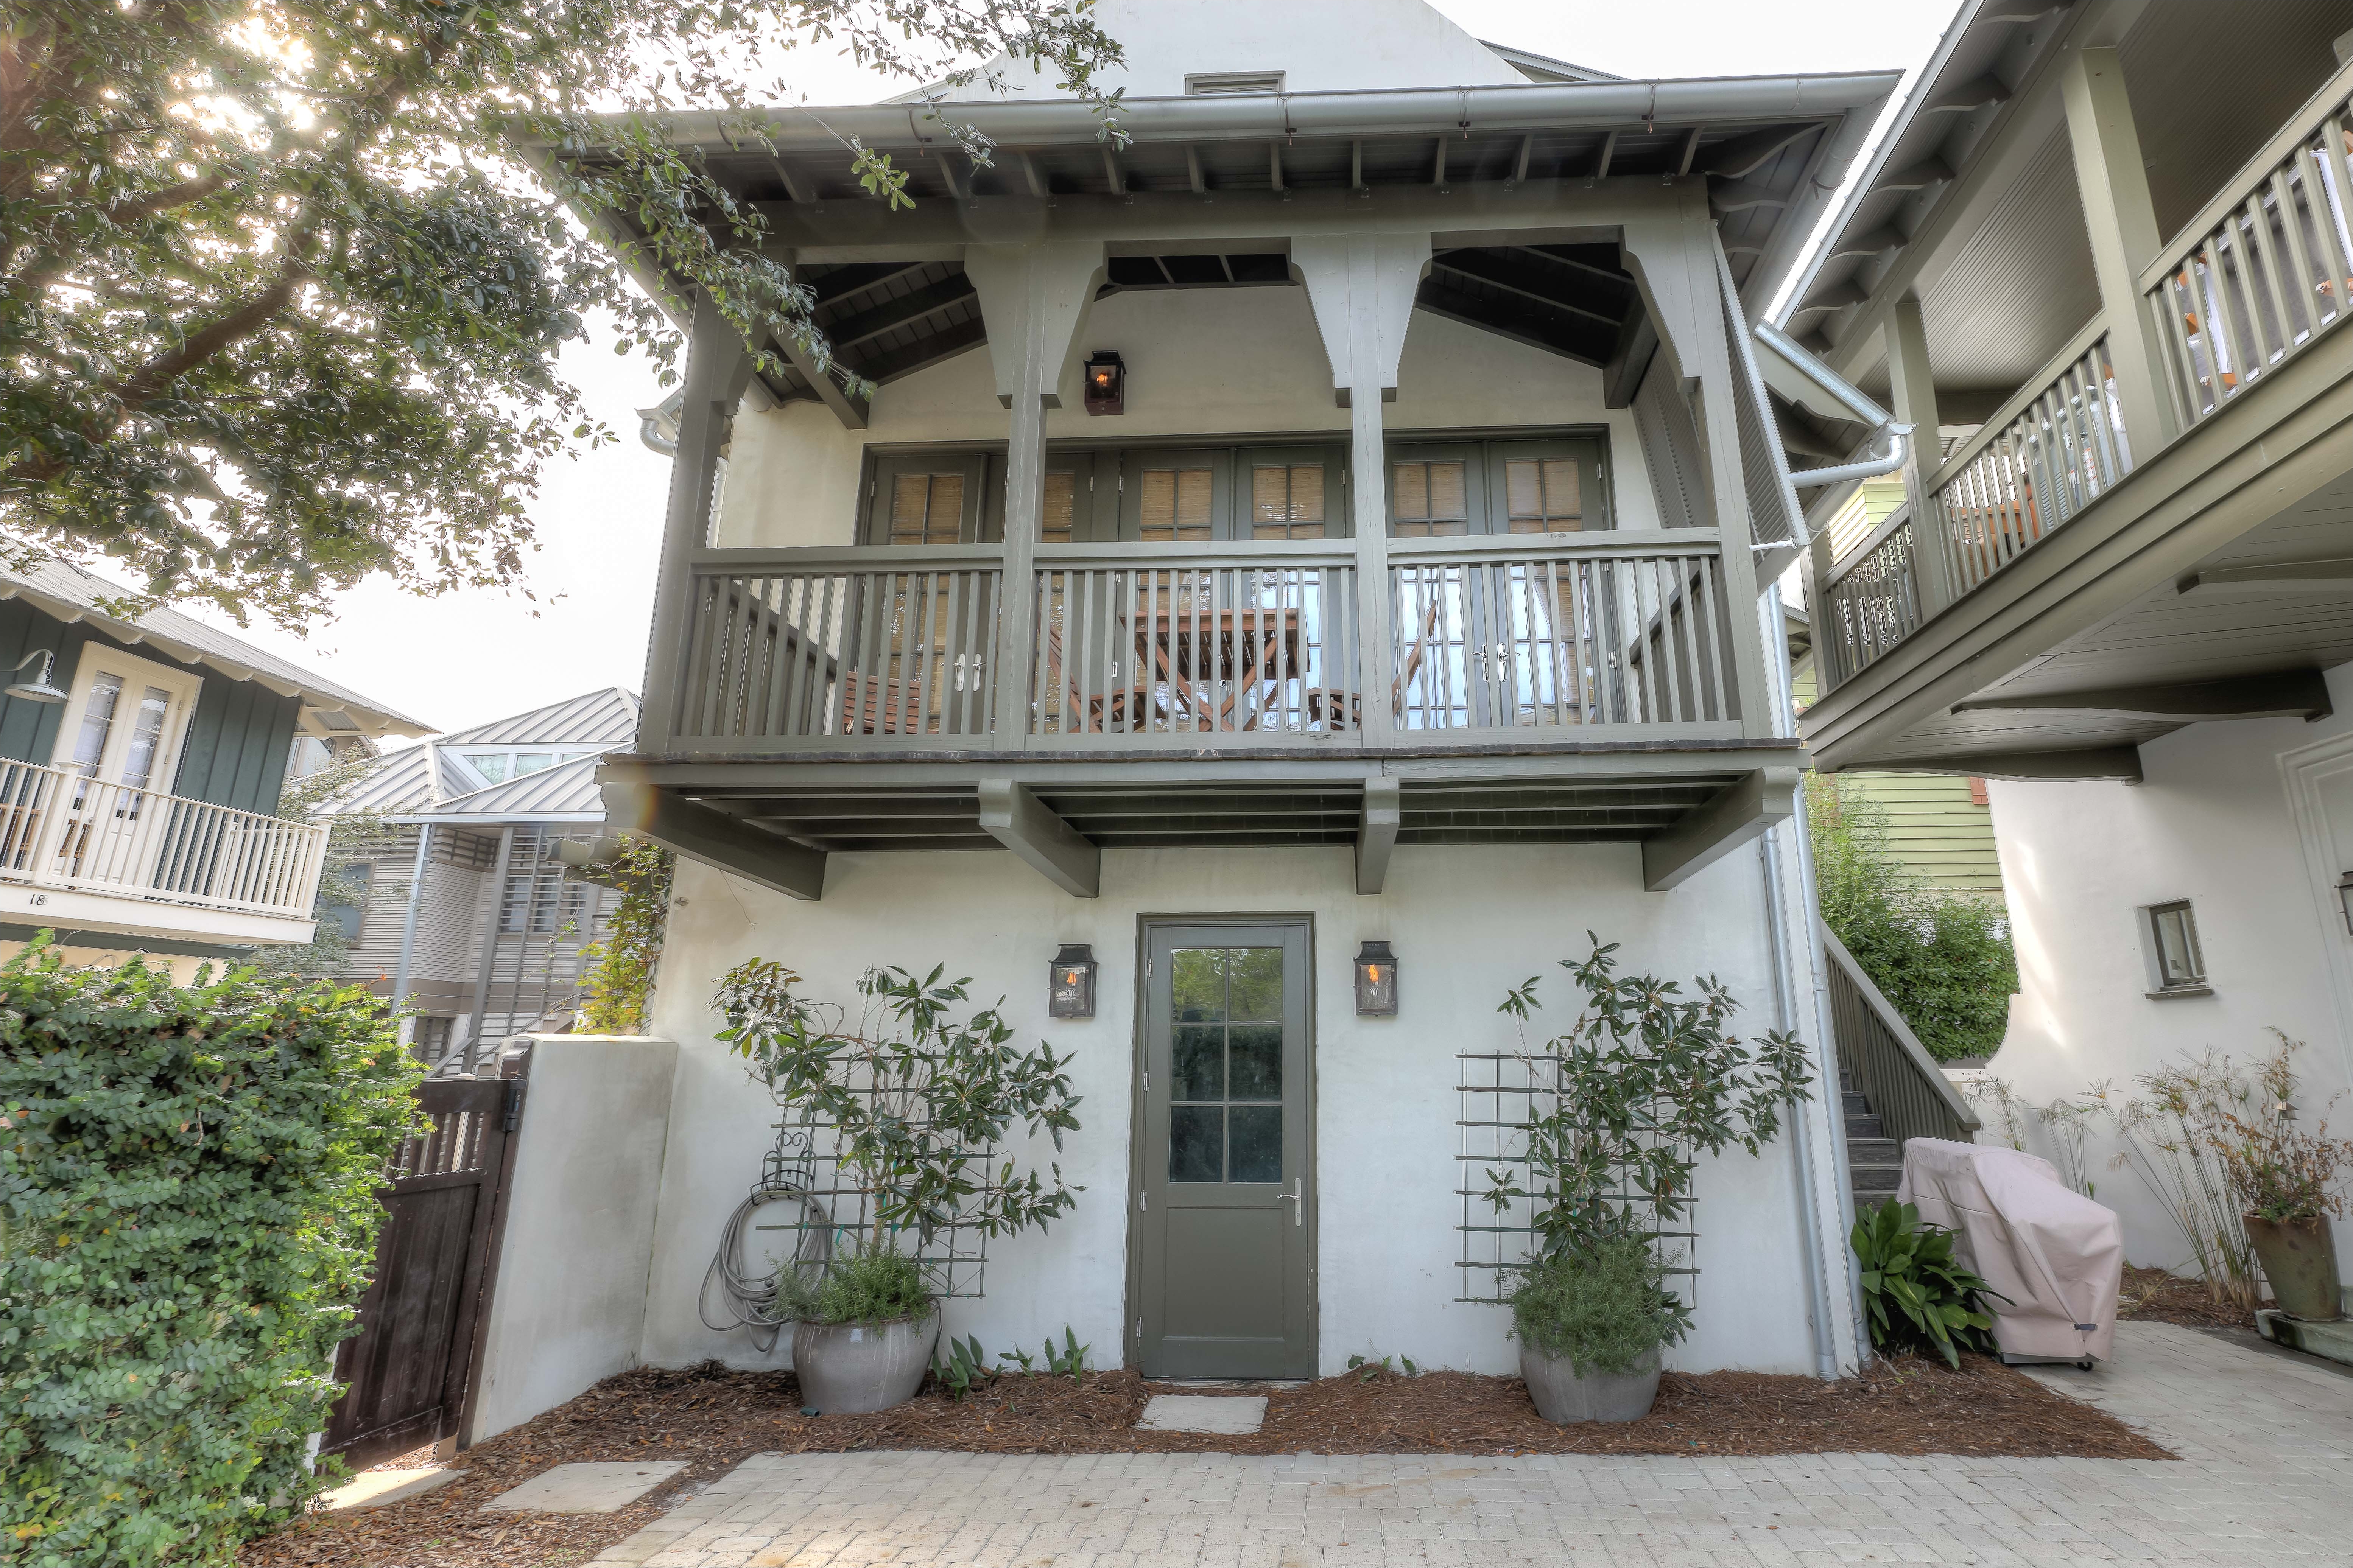 Homes Rent Walton County Ga Abaco Pearl Carriage House 30a Luxury Vacations